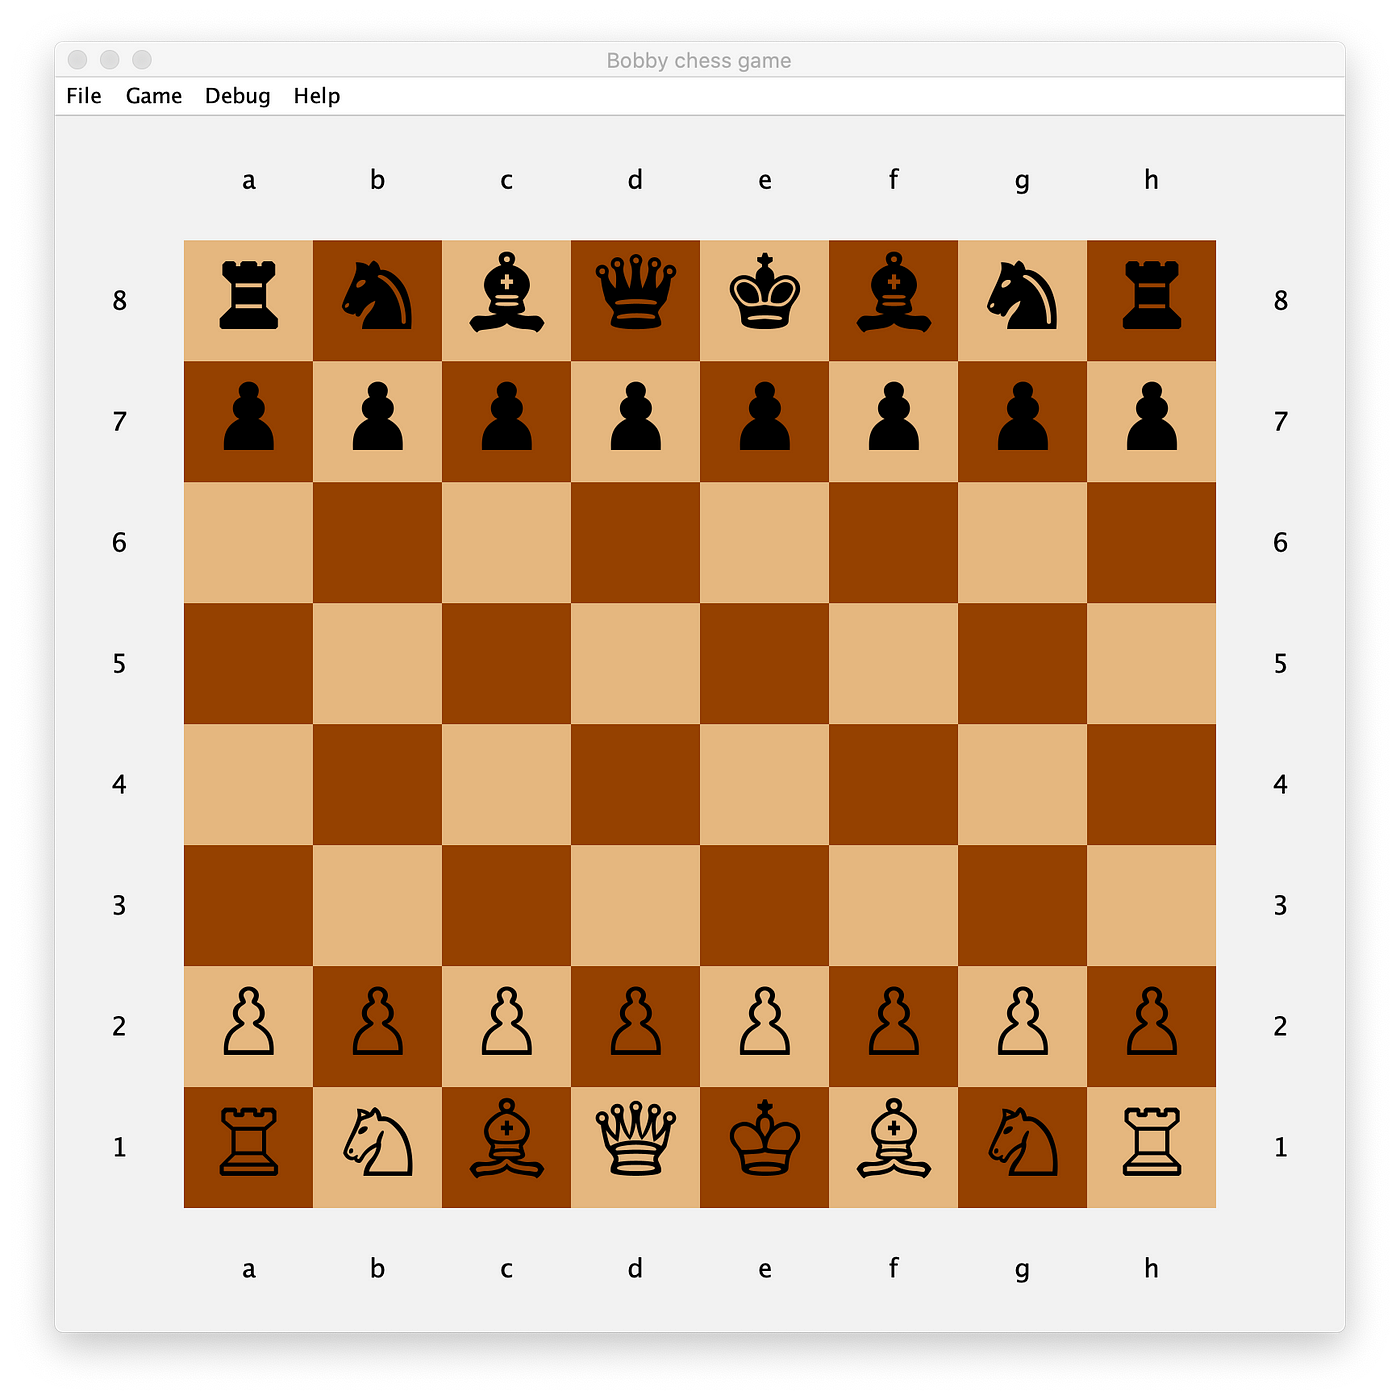 * Chess game search engine